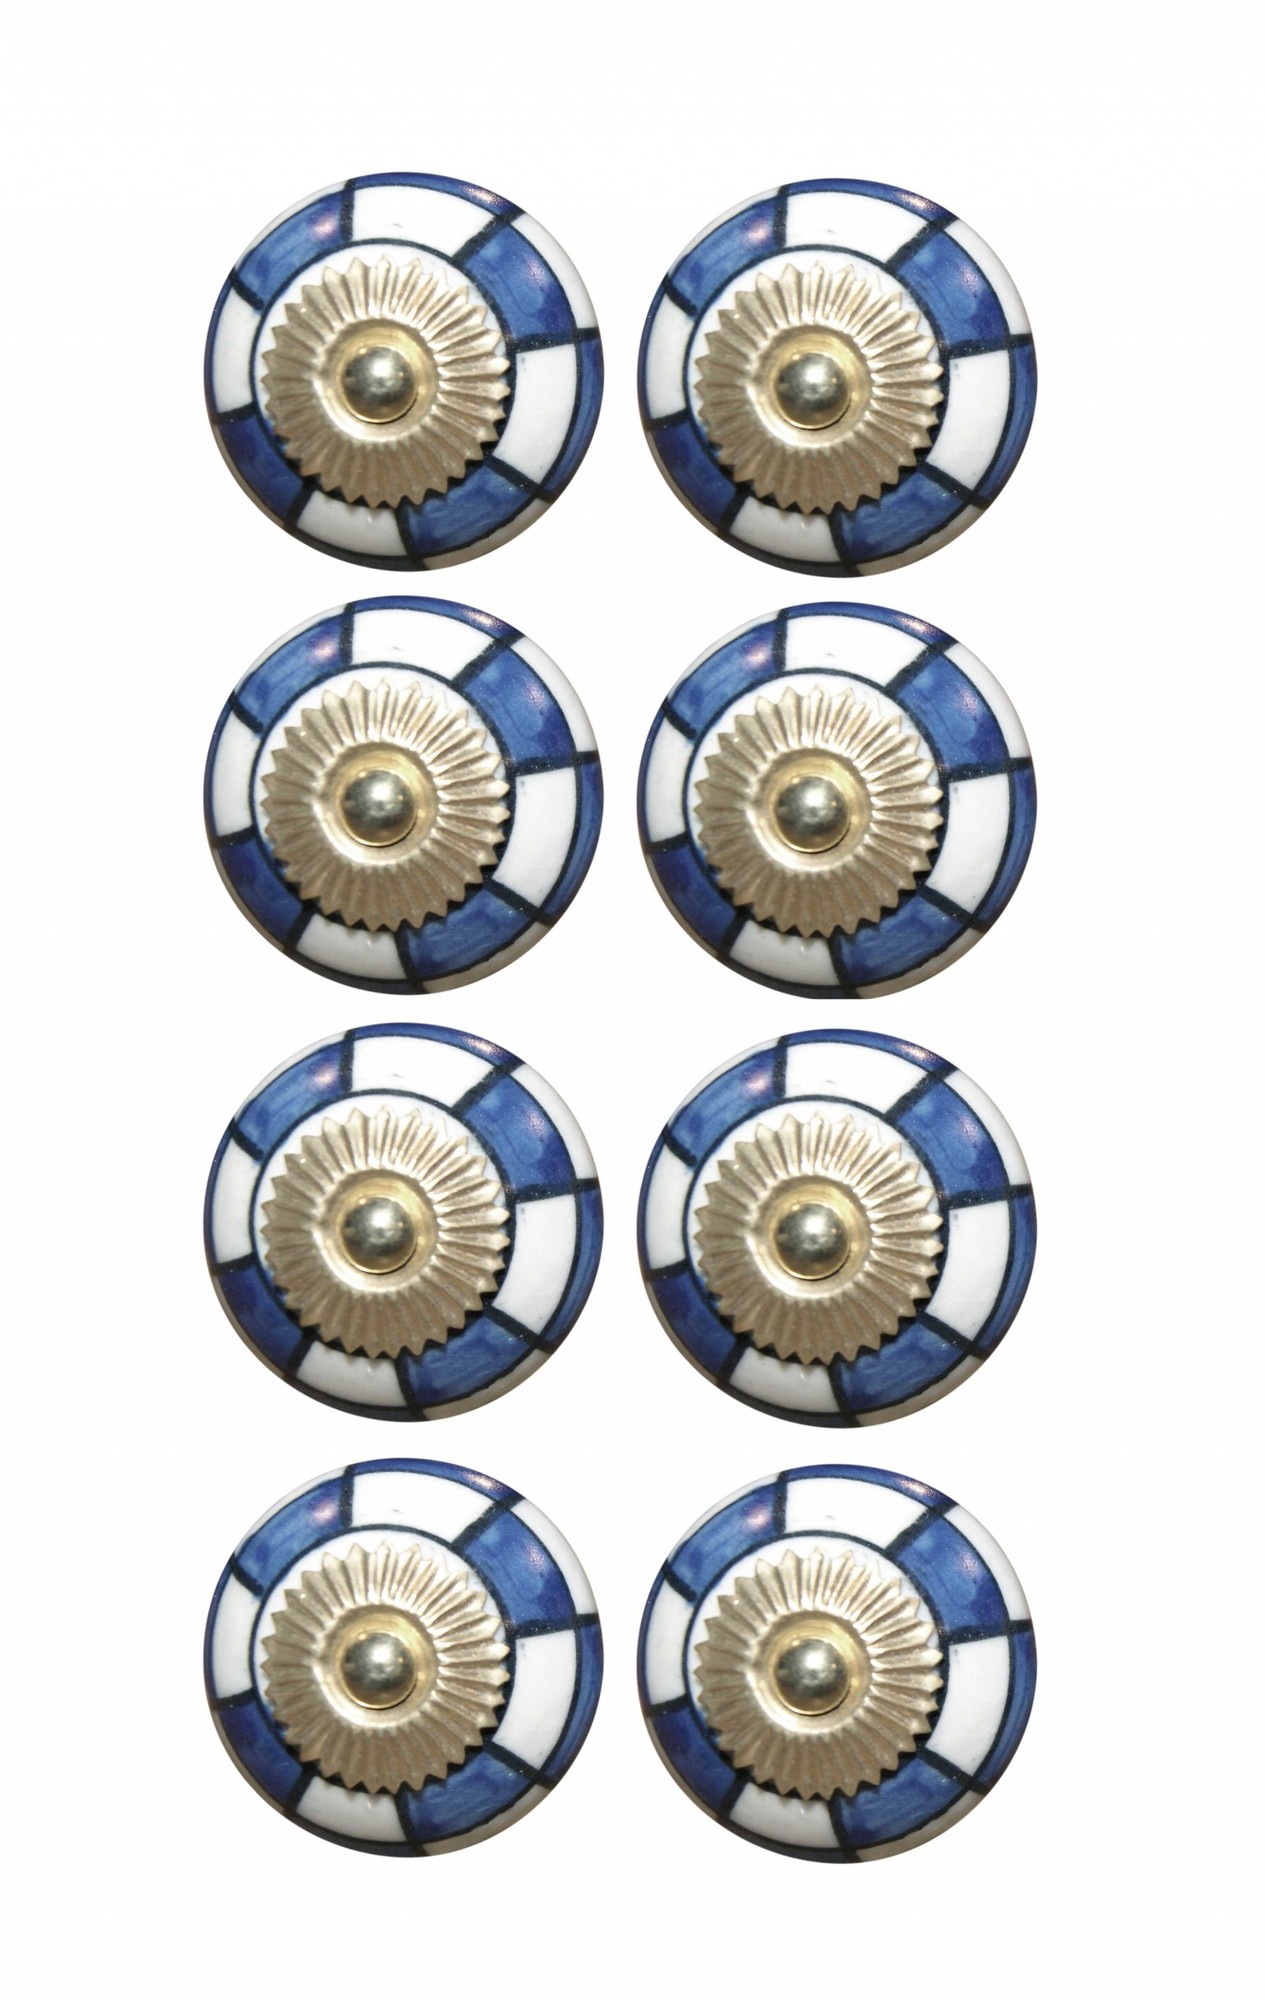 1.5" x 1.5" x 1.5" Blue, White And Gold - Knobs 8-Pack